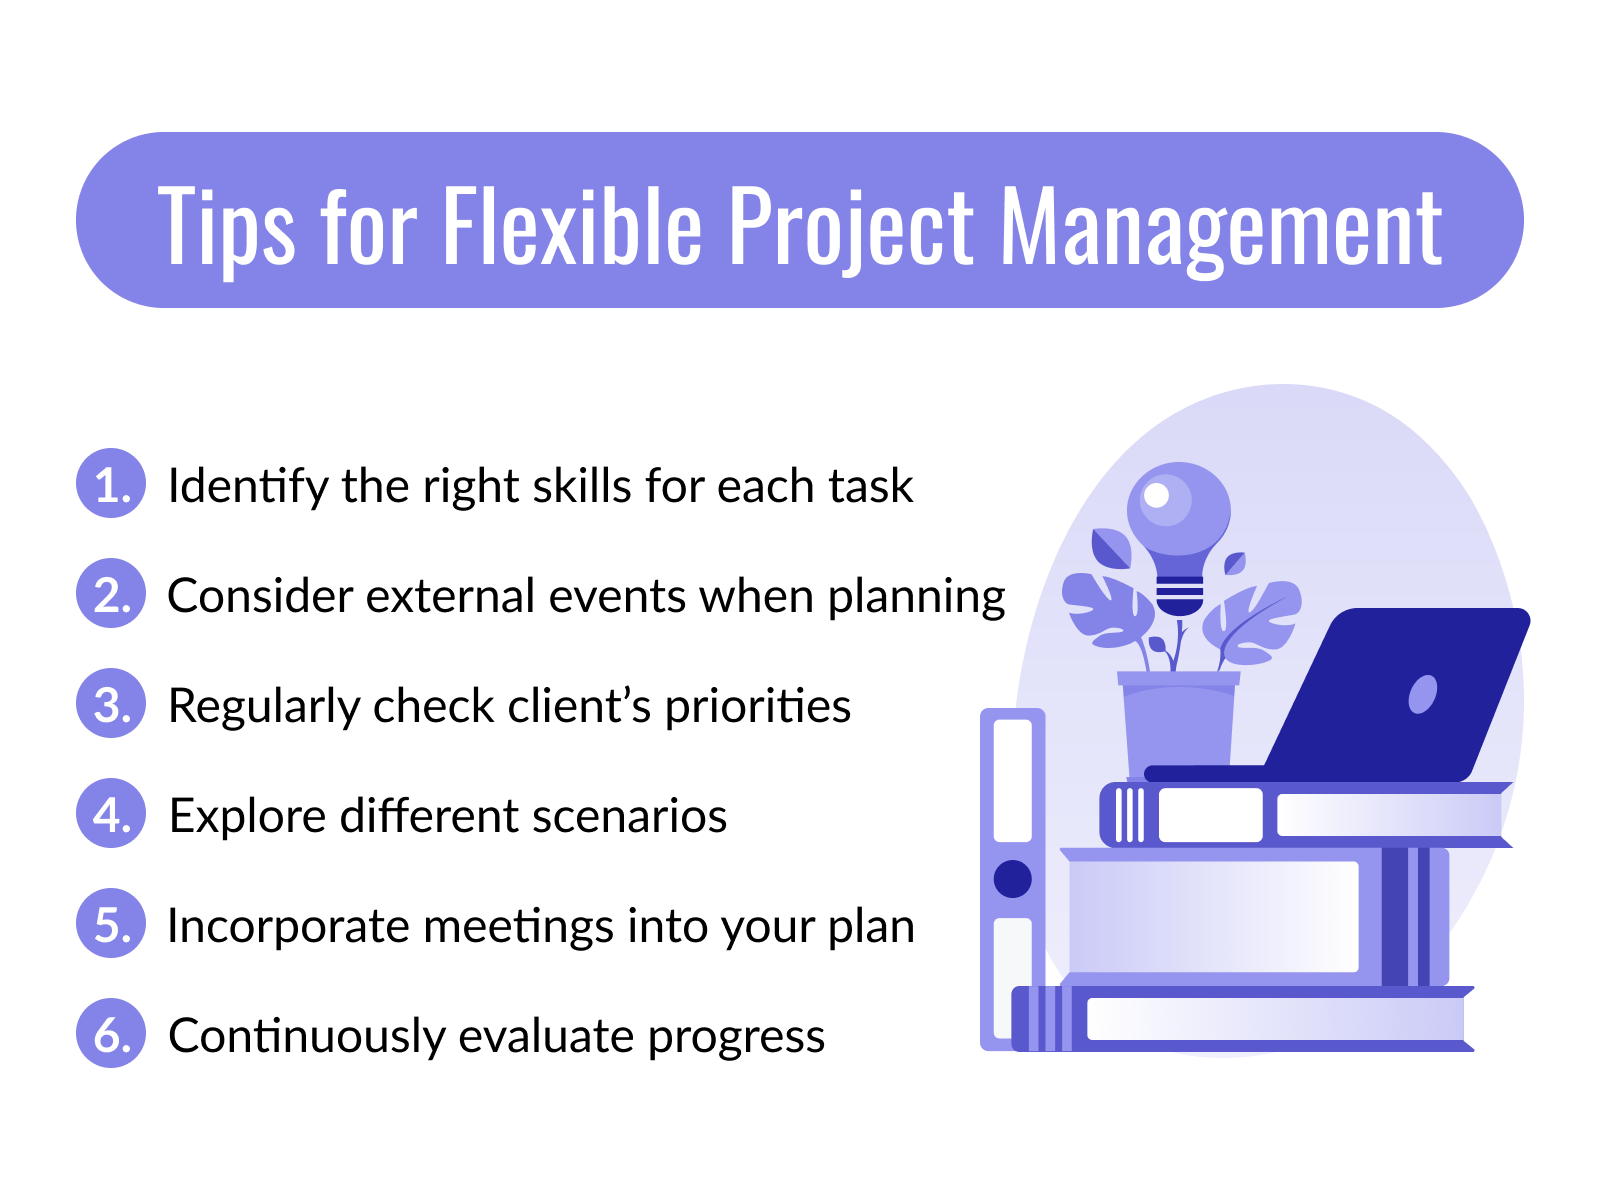 Tips for flexible project management